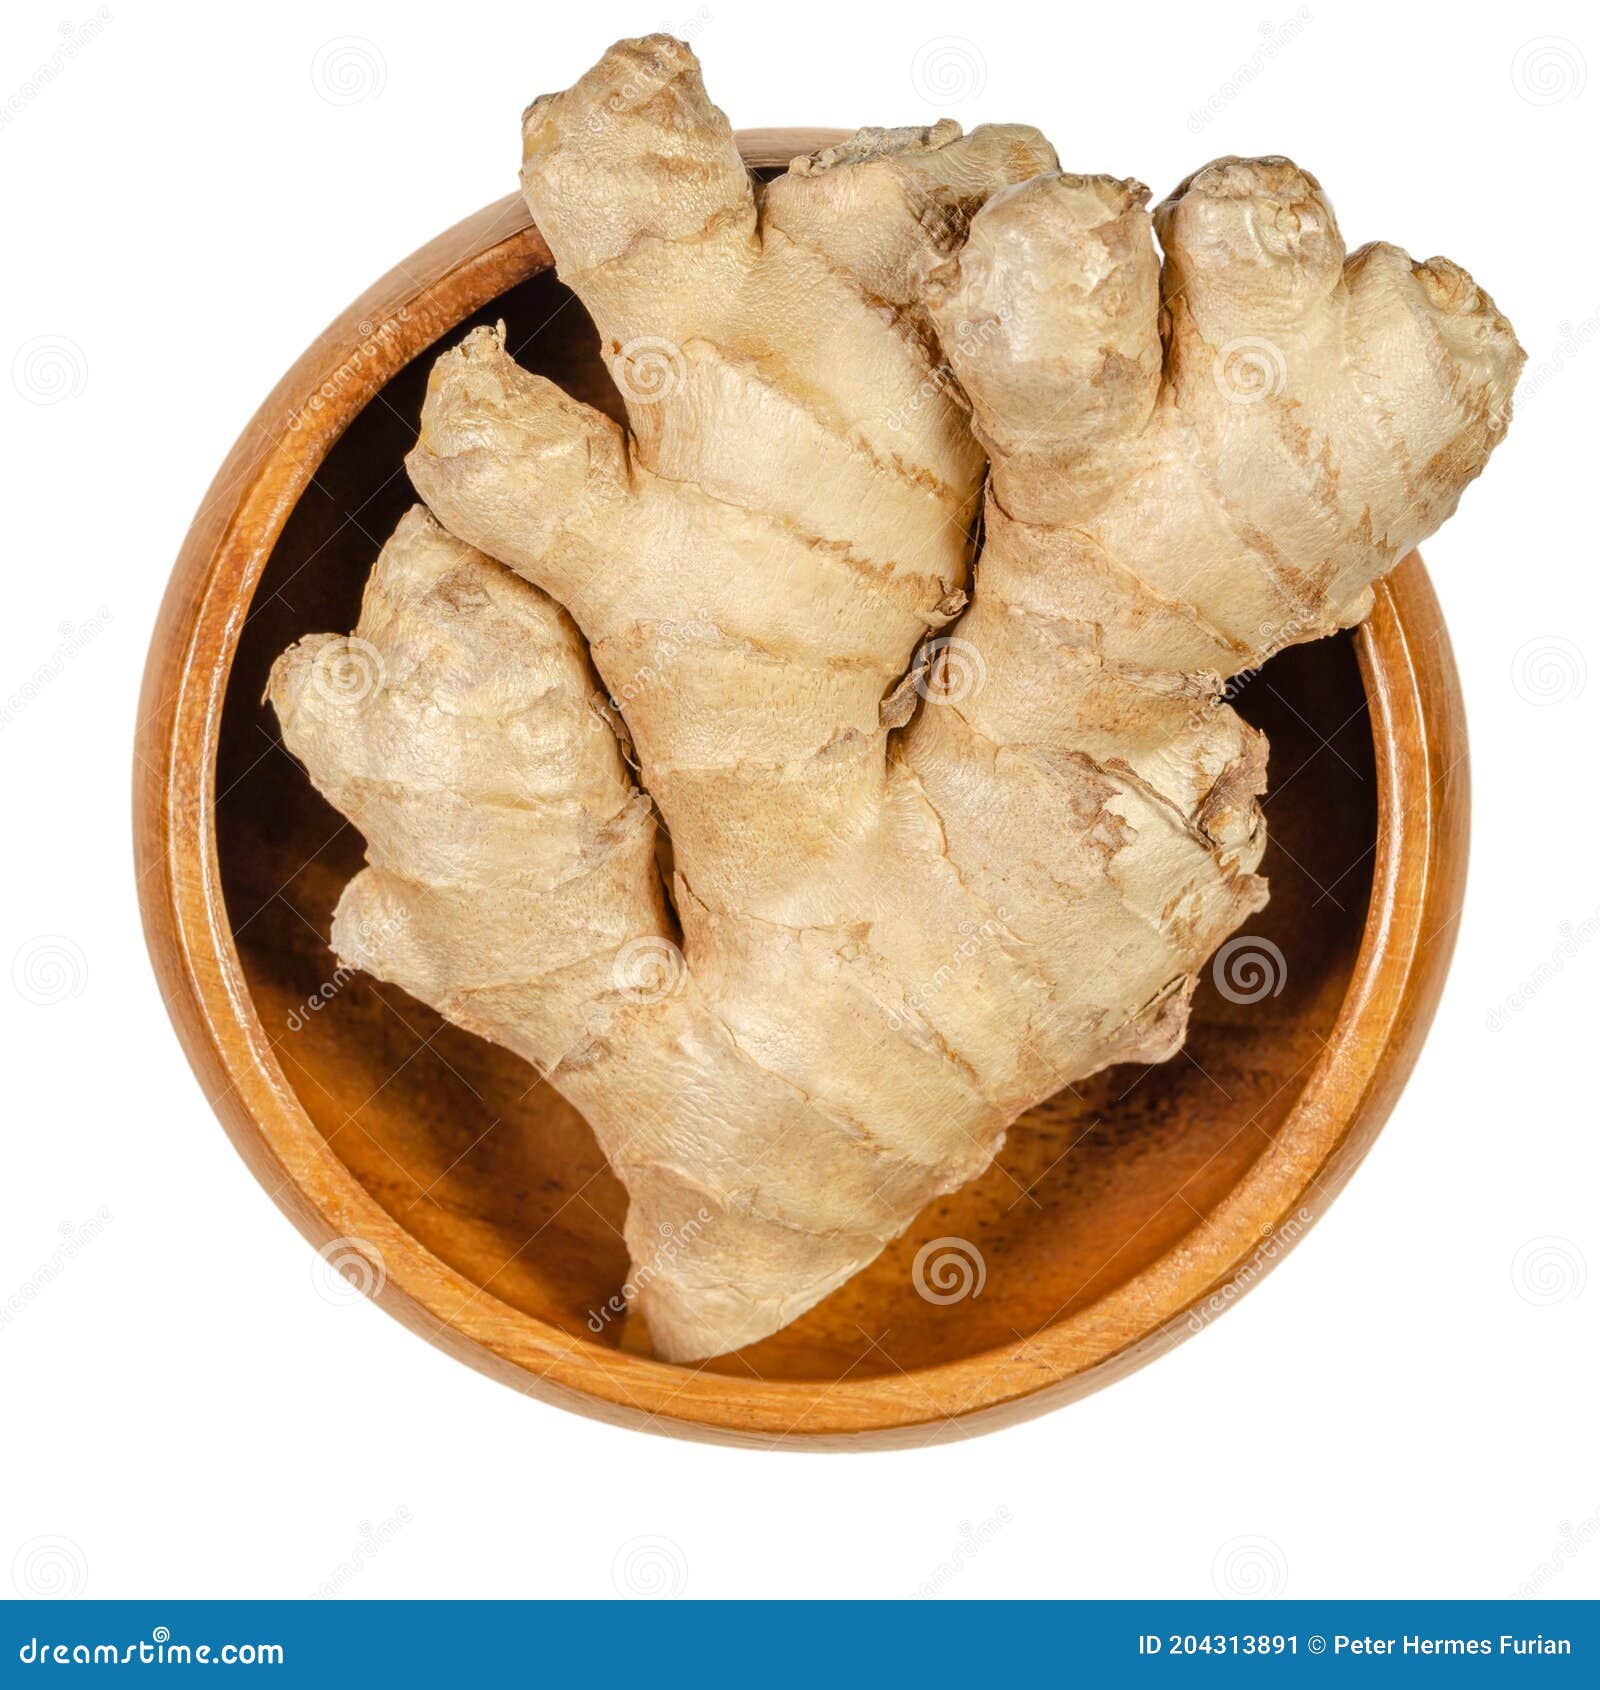 fresh ginger root, rhizome of zingiber officinale in wooden bowl